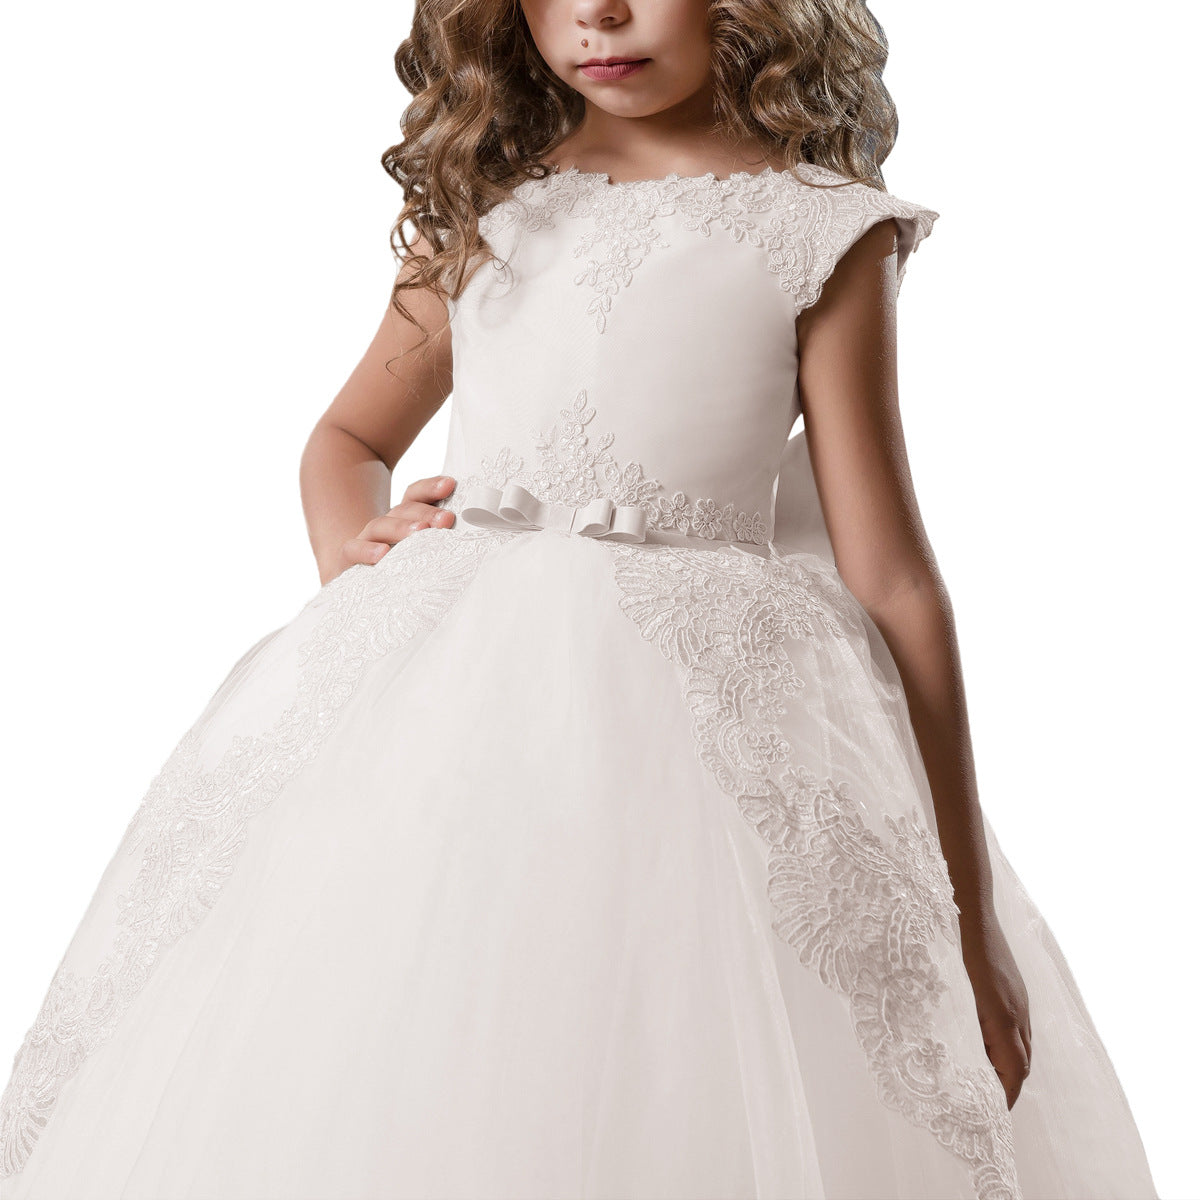 Cheap 3-10 Yrs Girls Party Dresses Wedding White Short Sleeve Prom Gown for Children  Kids Formal Events Costume Birthday Princess Clothes | Joom